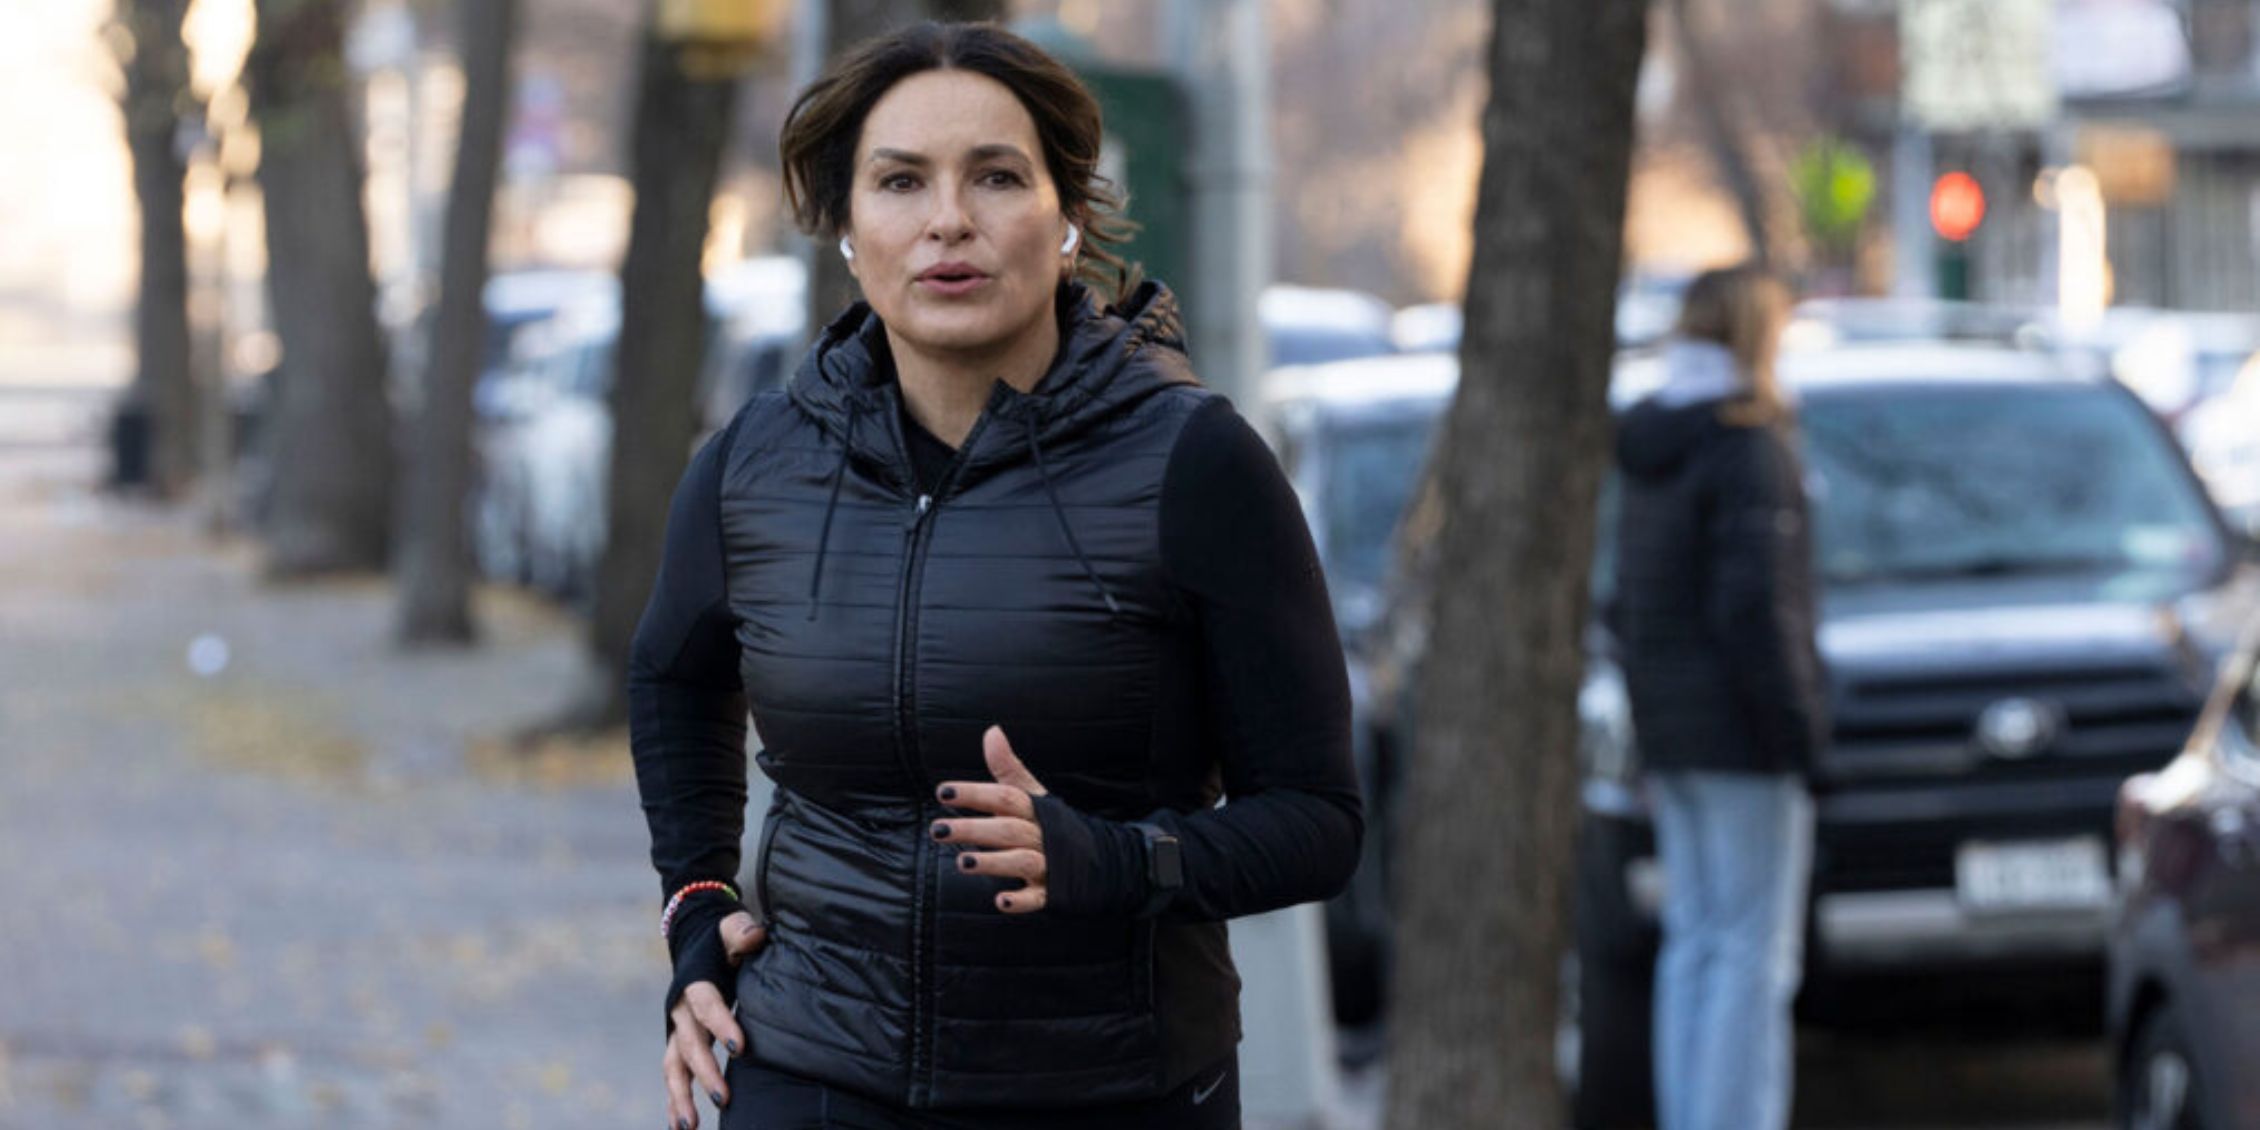 Law & Order: SVU's Olivia Benson tries to distract herself during a run